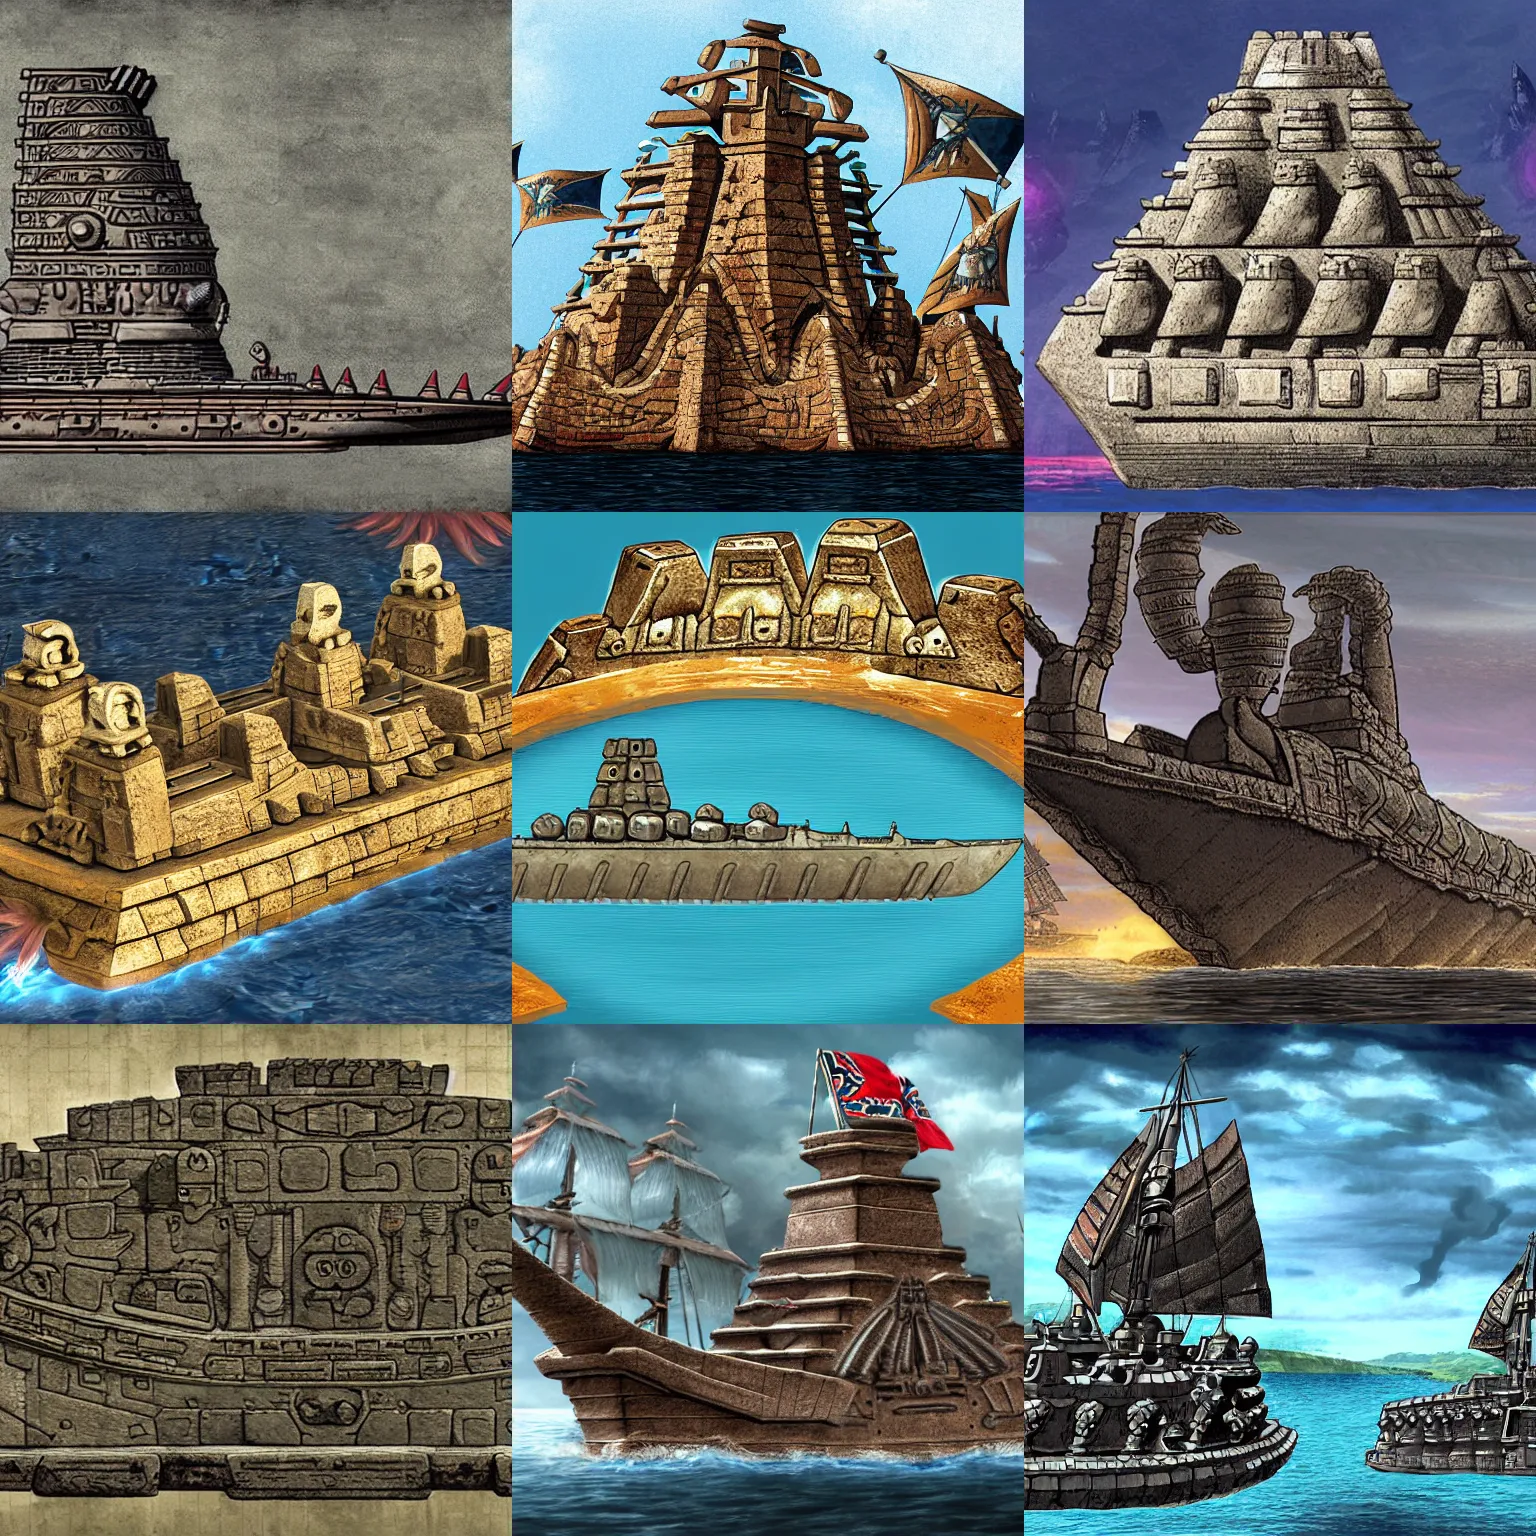 Prompt: A stone Aztec battleship, loading screen artwork for the game 'Europa Universalis 4'